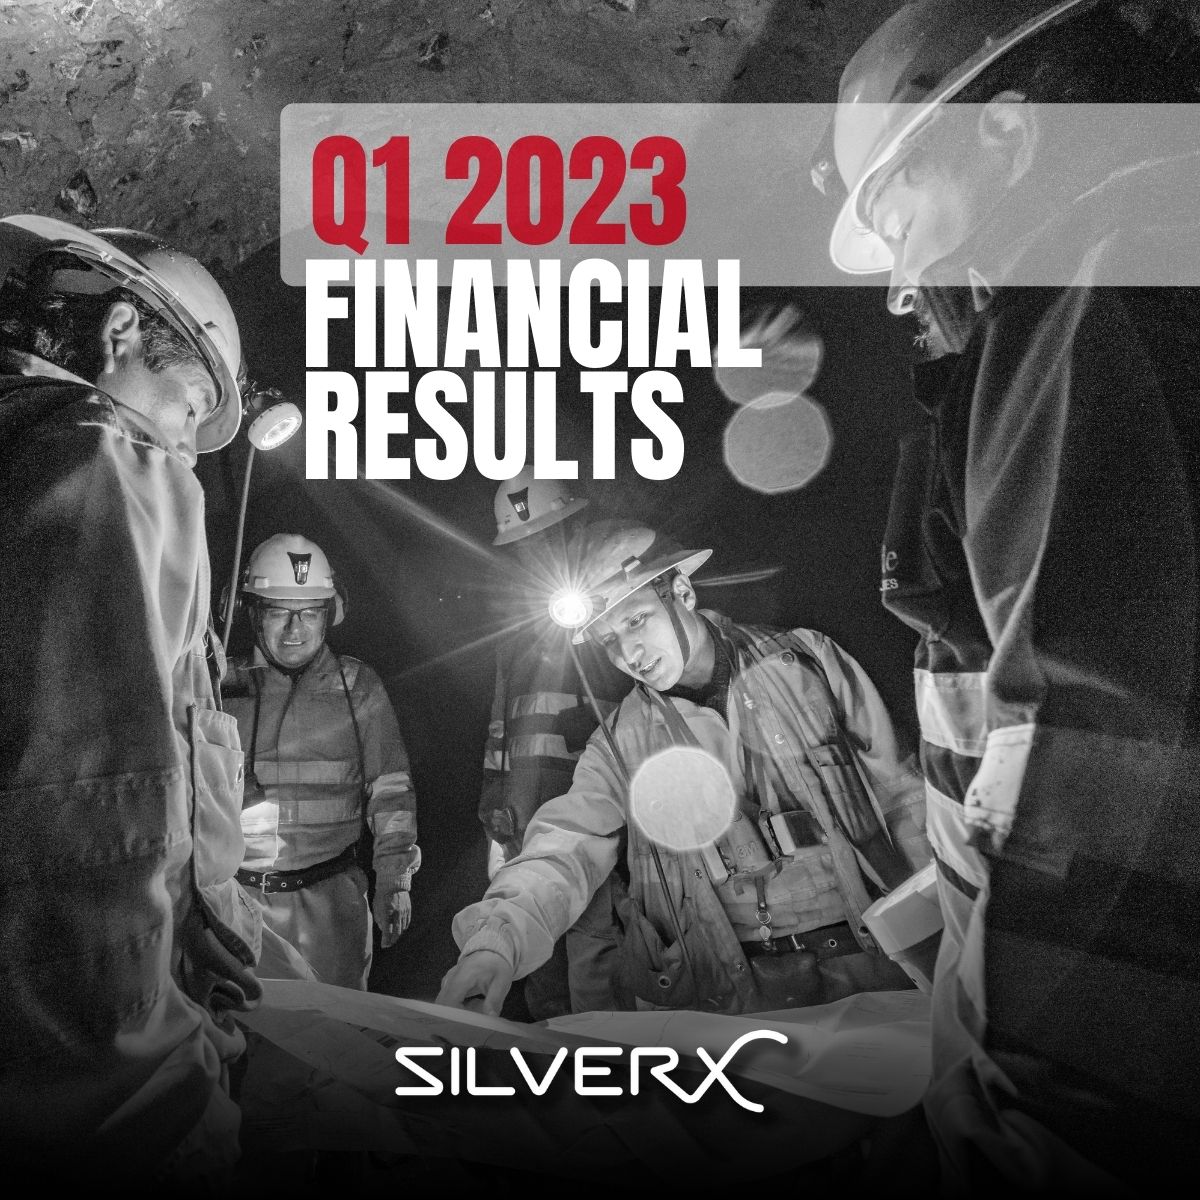 We are pleased to report financial results for Q1 2023 for the Nueva Recuperada Project in central #Peru. Operations generated revenues of $4.6 million, an 18% increase compared with Q4 2022 as ramp up continues.

Full #newsrelease ➡️ bit.ly/3WwtOWL

$AGX.V $AGXPF